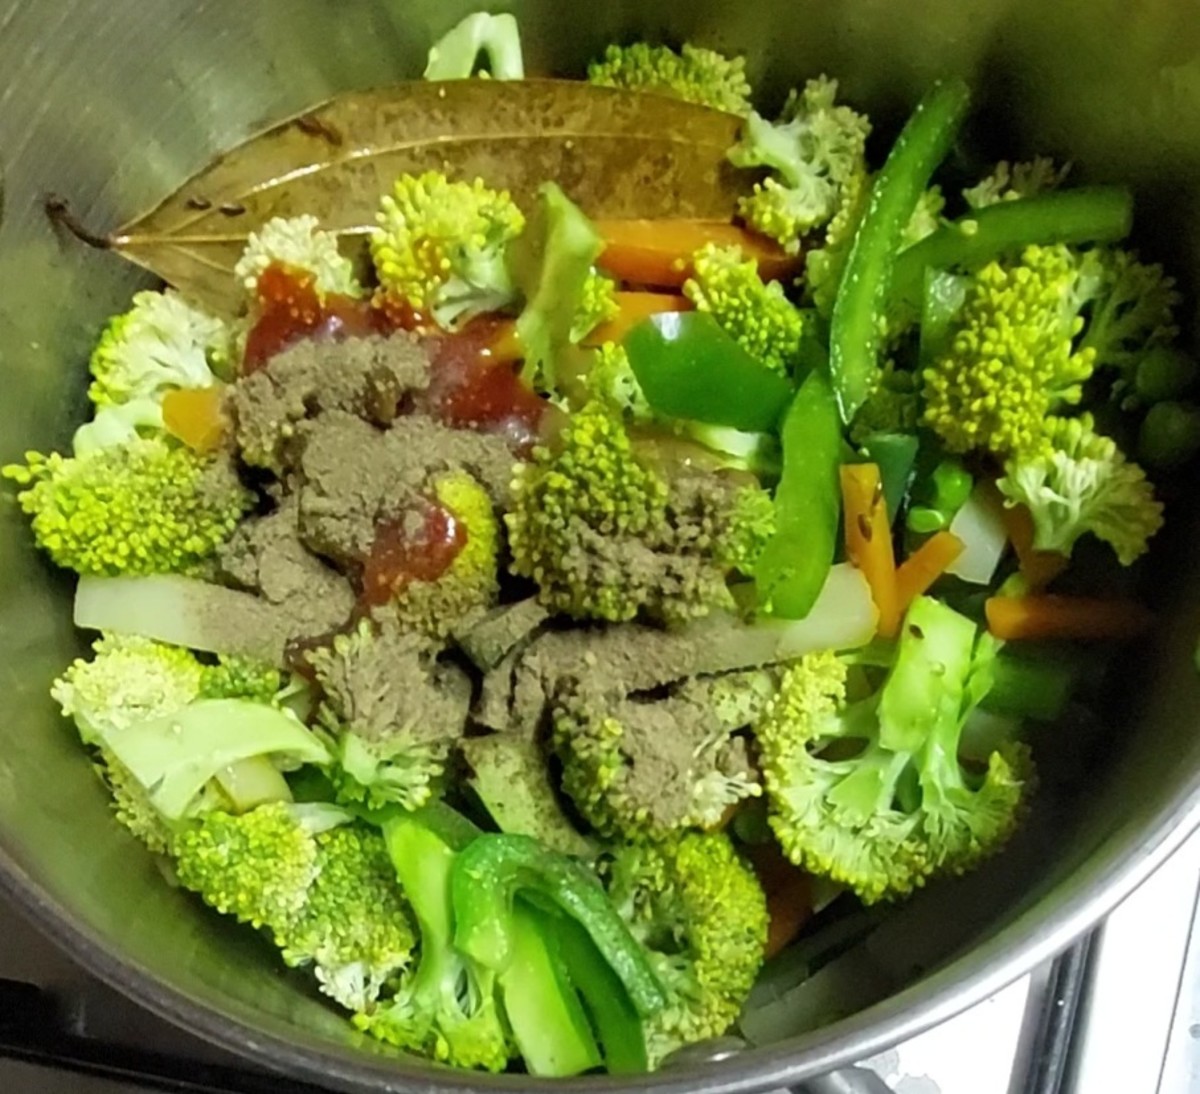 When vegetables are half-cooked (about 10 minutes), open the lid and add capsicum and broccoli. Fry for 1 minute. Add 2 tablespoons tomato sauce, 1 tablespoon green chili sauce and 1 tablespoon pepper powder.